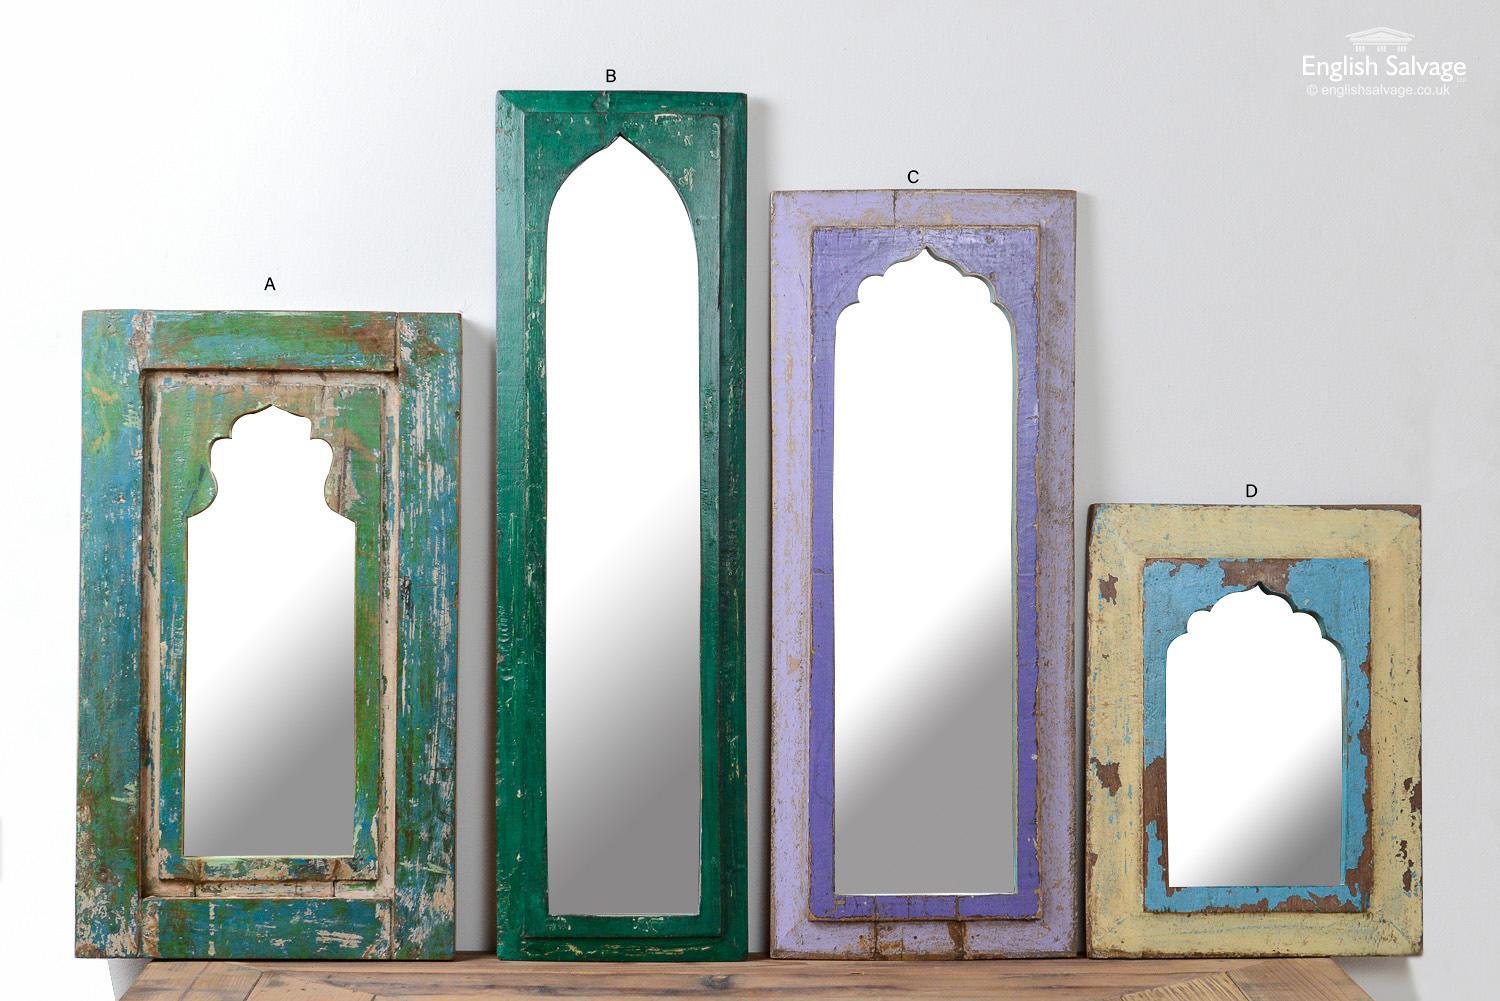 Rustic wooden framed mirrors from India. Each is unique, and naively made from reclaimed wood, with a lovely patina from paint remnants and age.